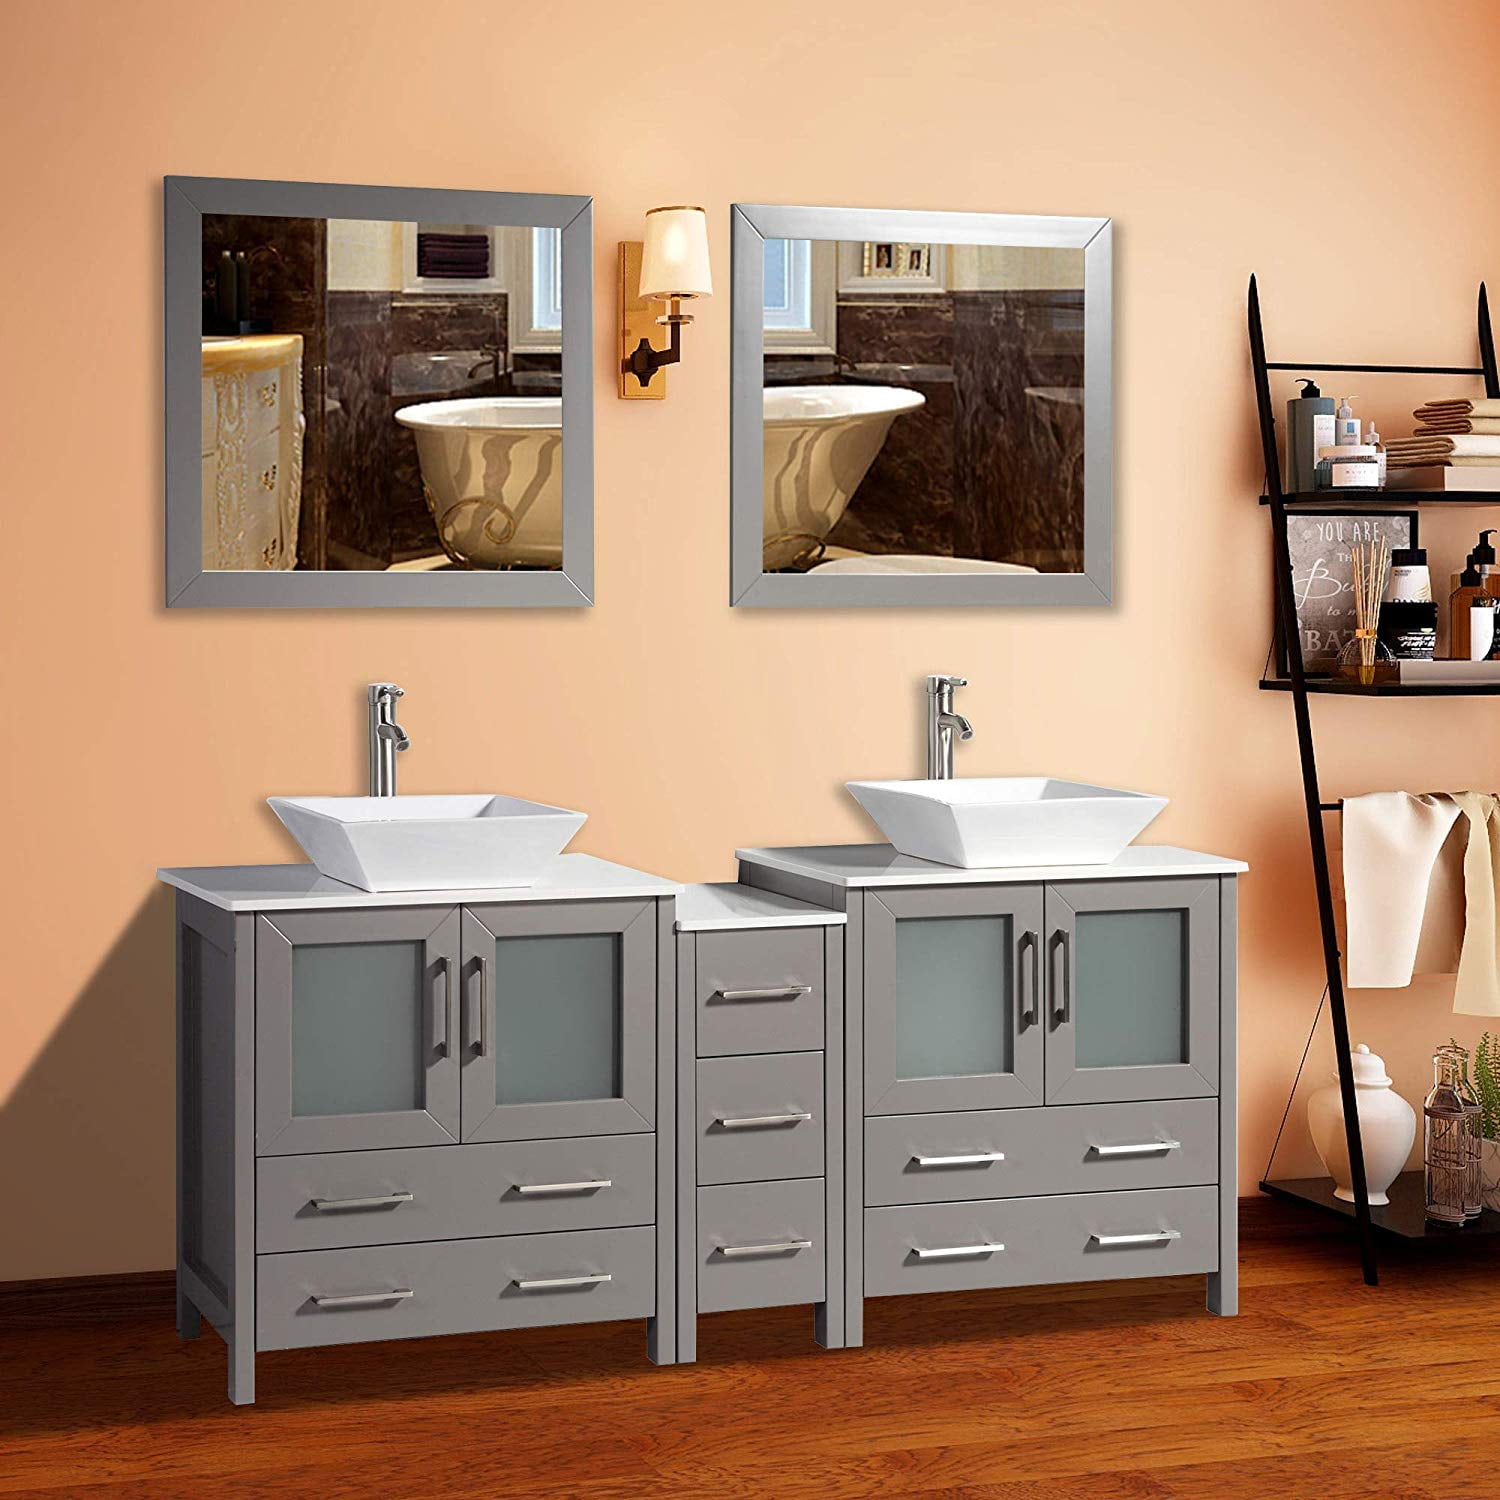 Darby Home Co Bowlin 72 Double Sink Bathroom Vanity Reviews